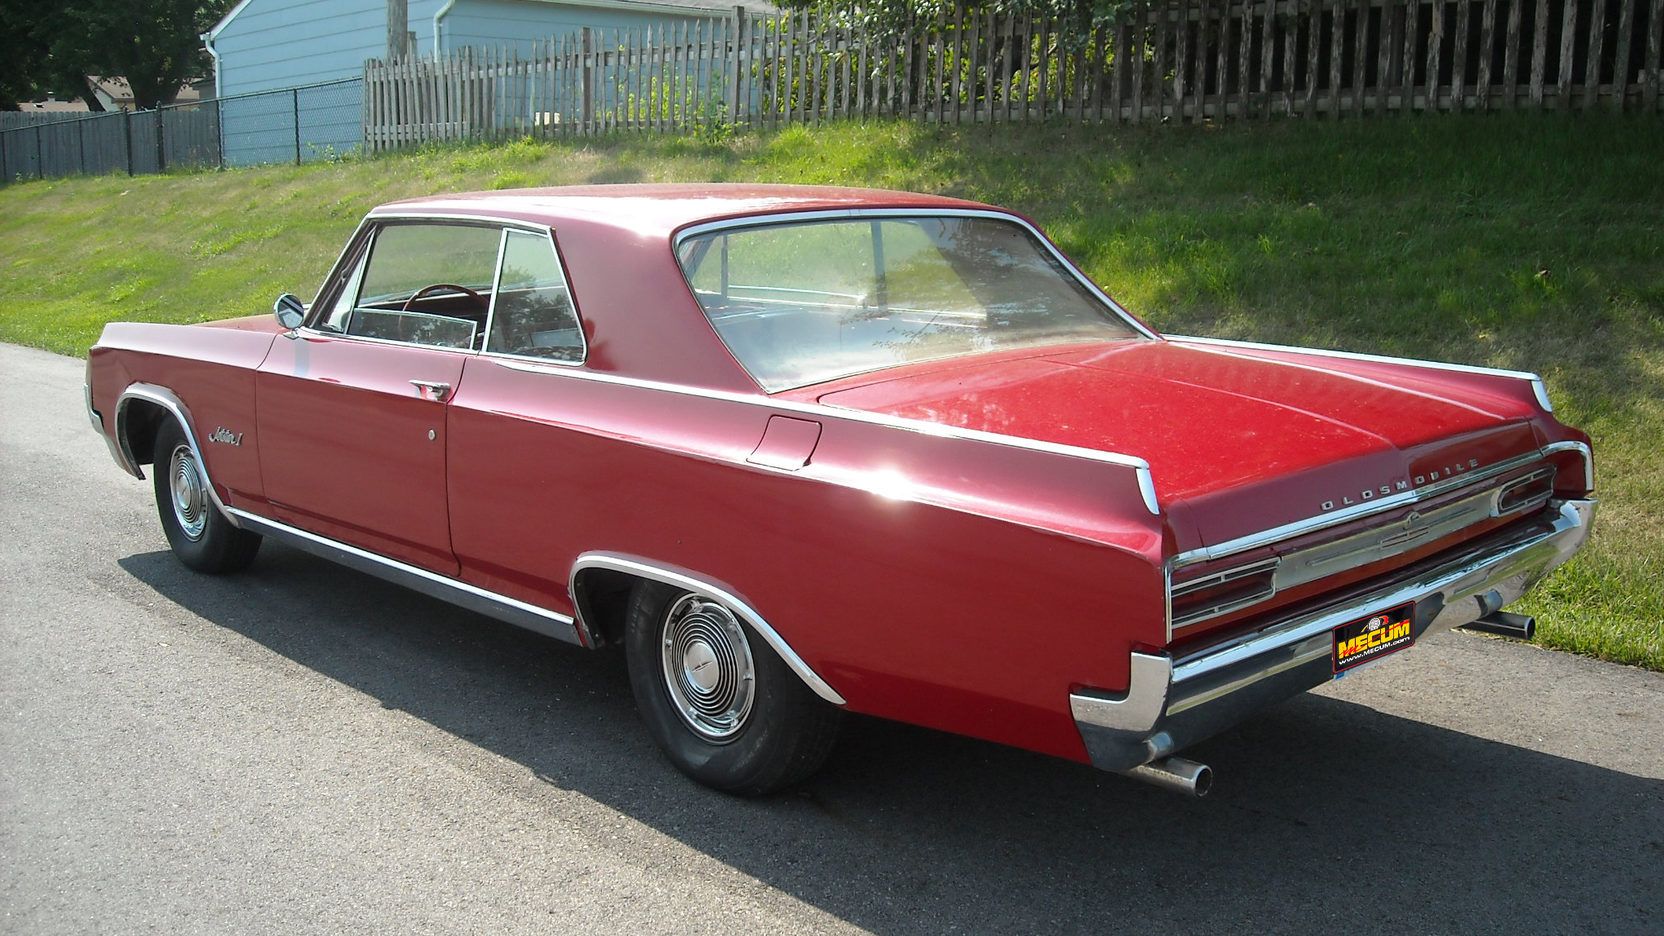 Classic 1964 Oldsmobile Jetstar I: About $21,000